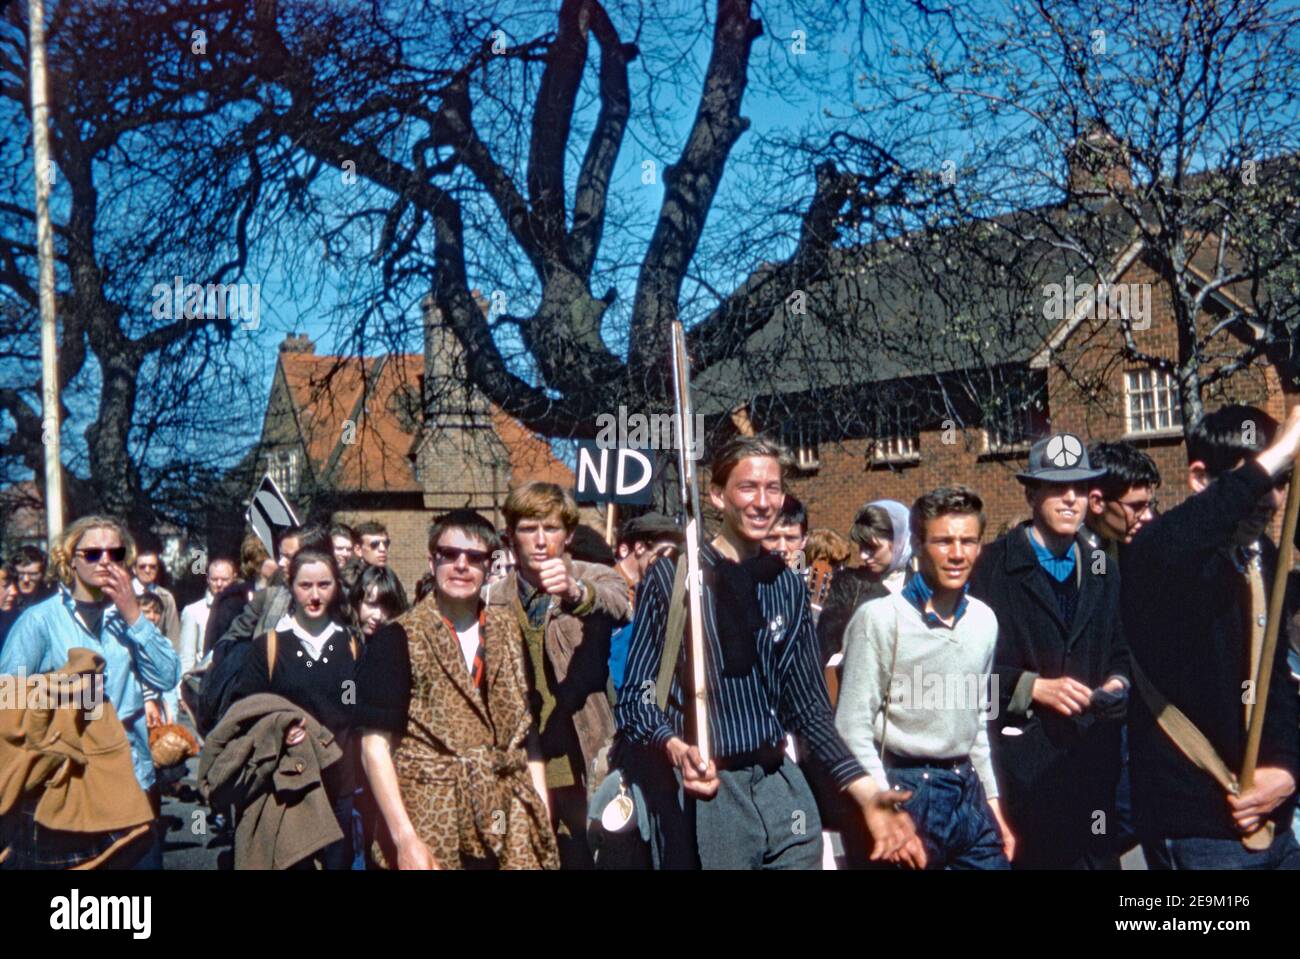 Marchers in west London, on their way to central London on the CND Aldermaston march in 1962. Visible is the distinctive black and white, round logo designed for the British nuclear disarmament movement in 1958 – now widely seen as a ‘peace sign’. Stock Photo